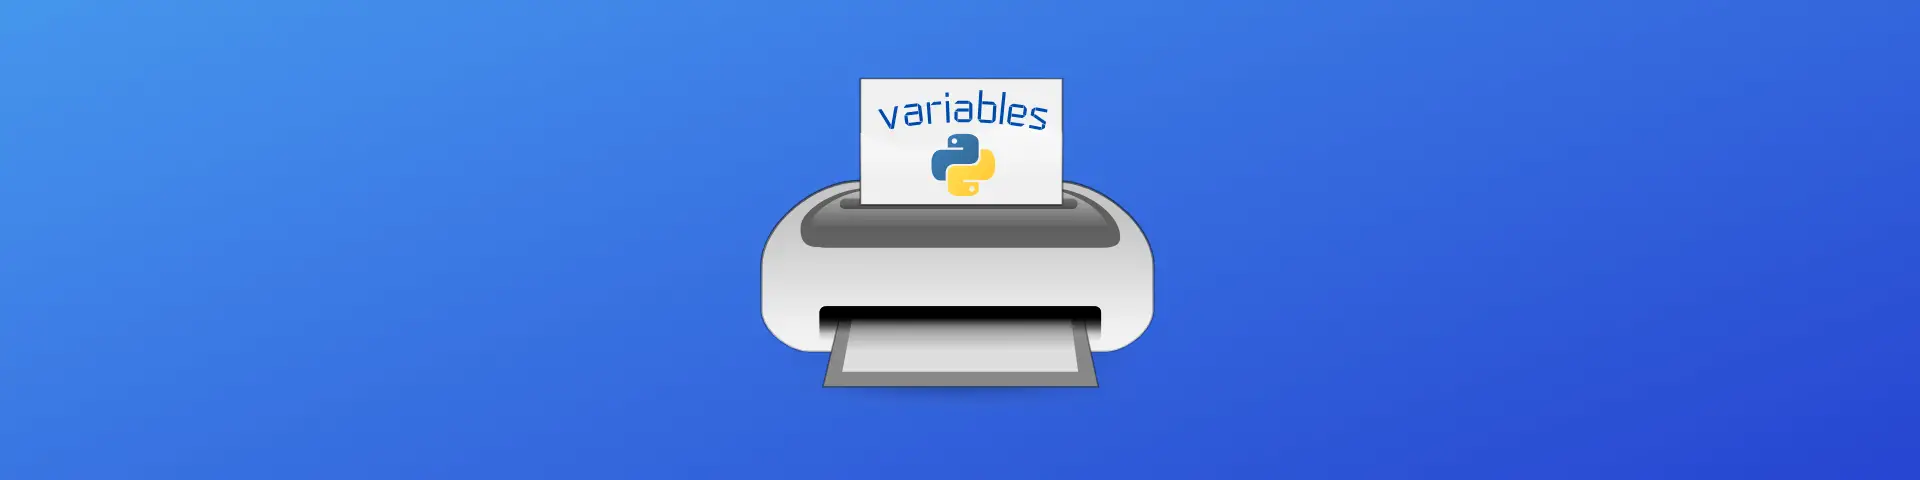 How to print variables in Python